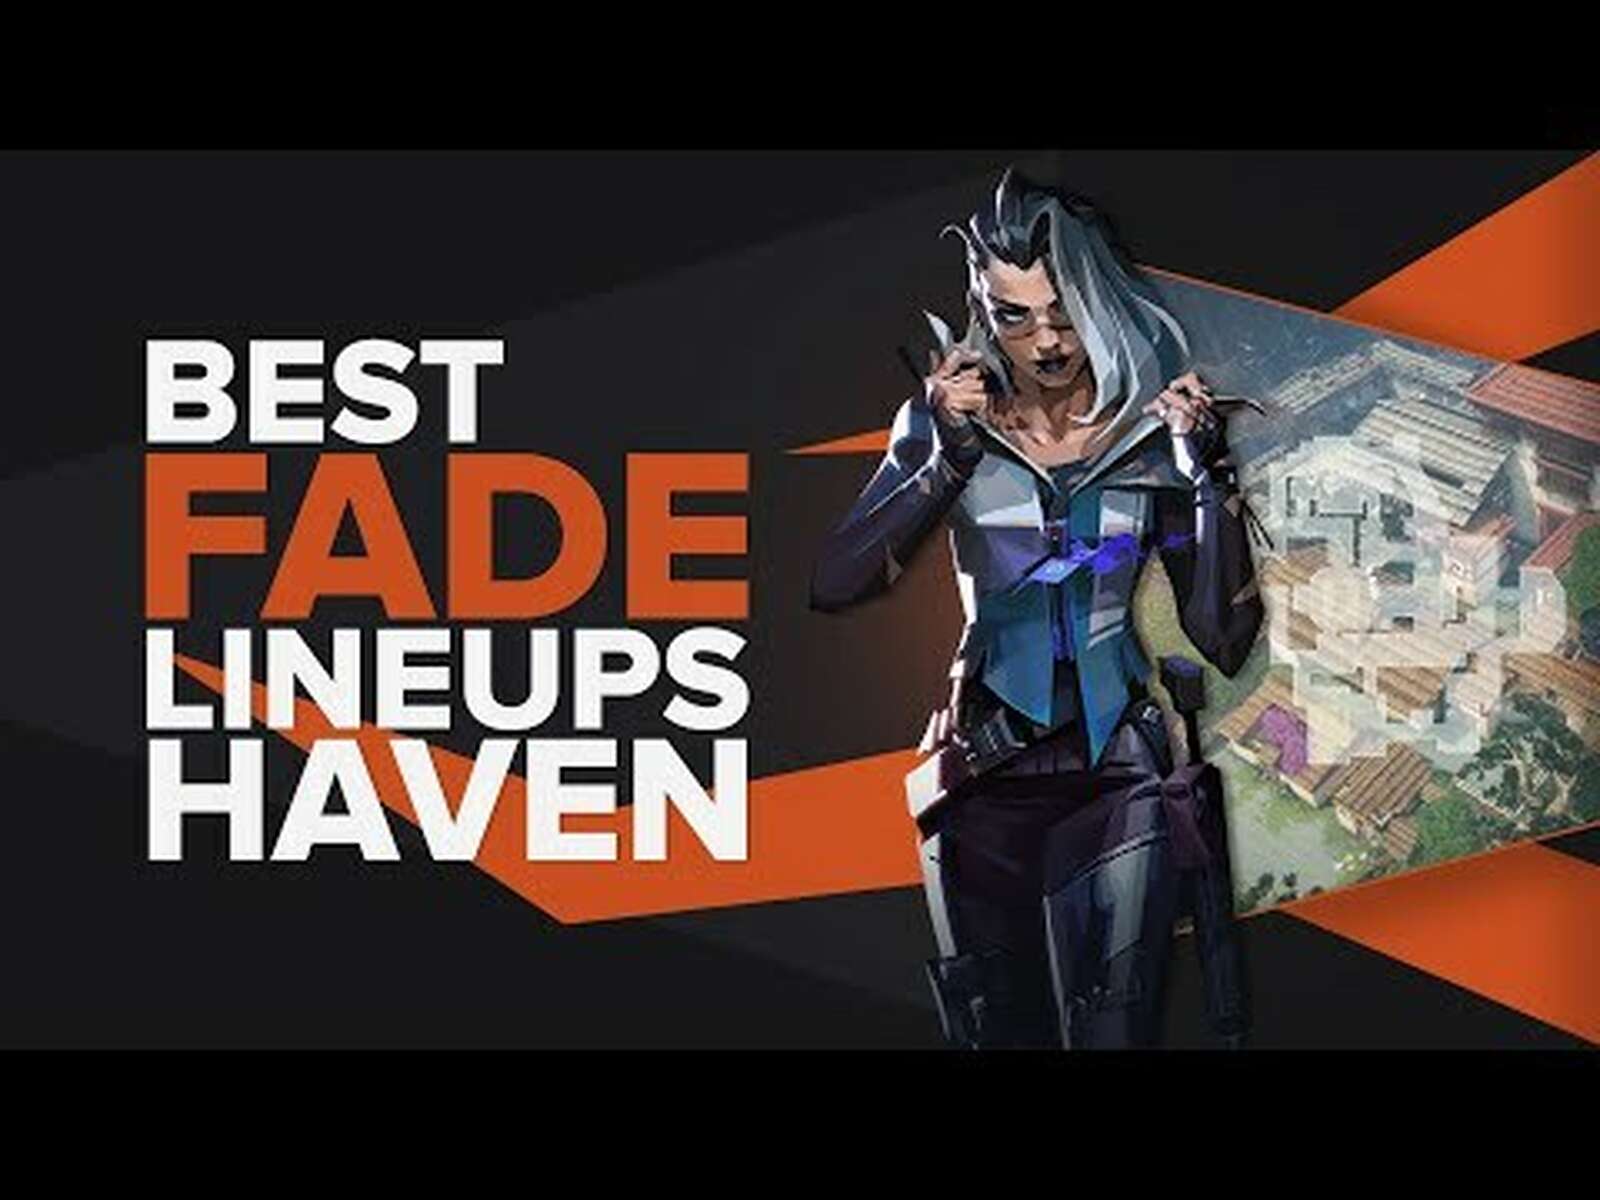 The Best Fade Lineups on Haven